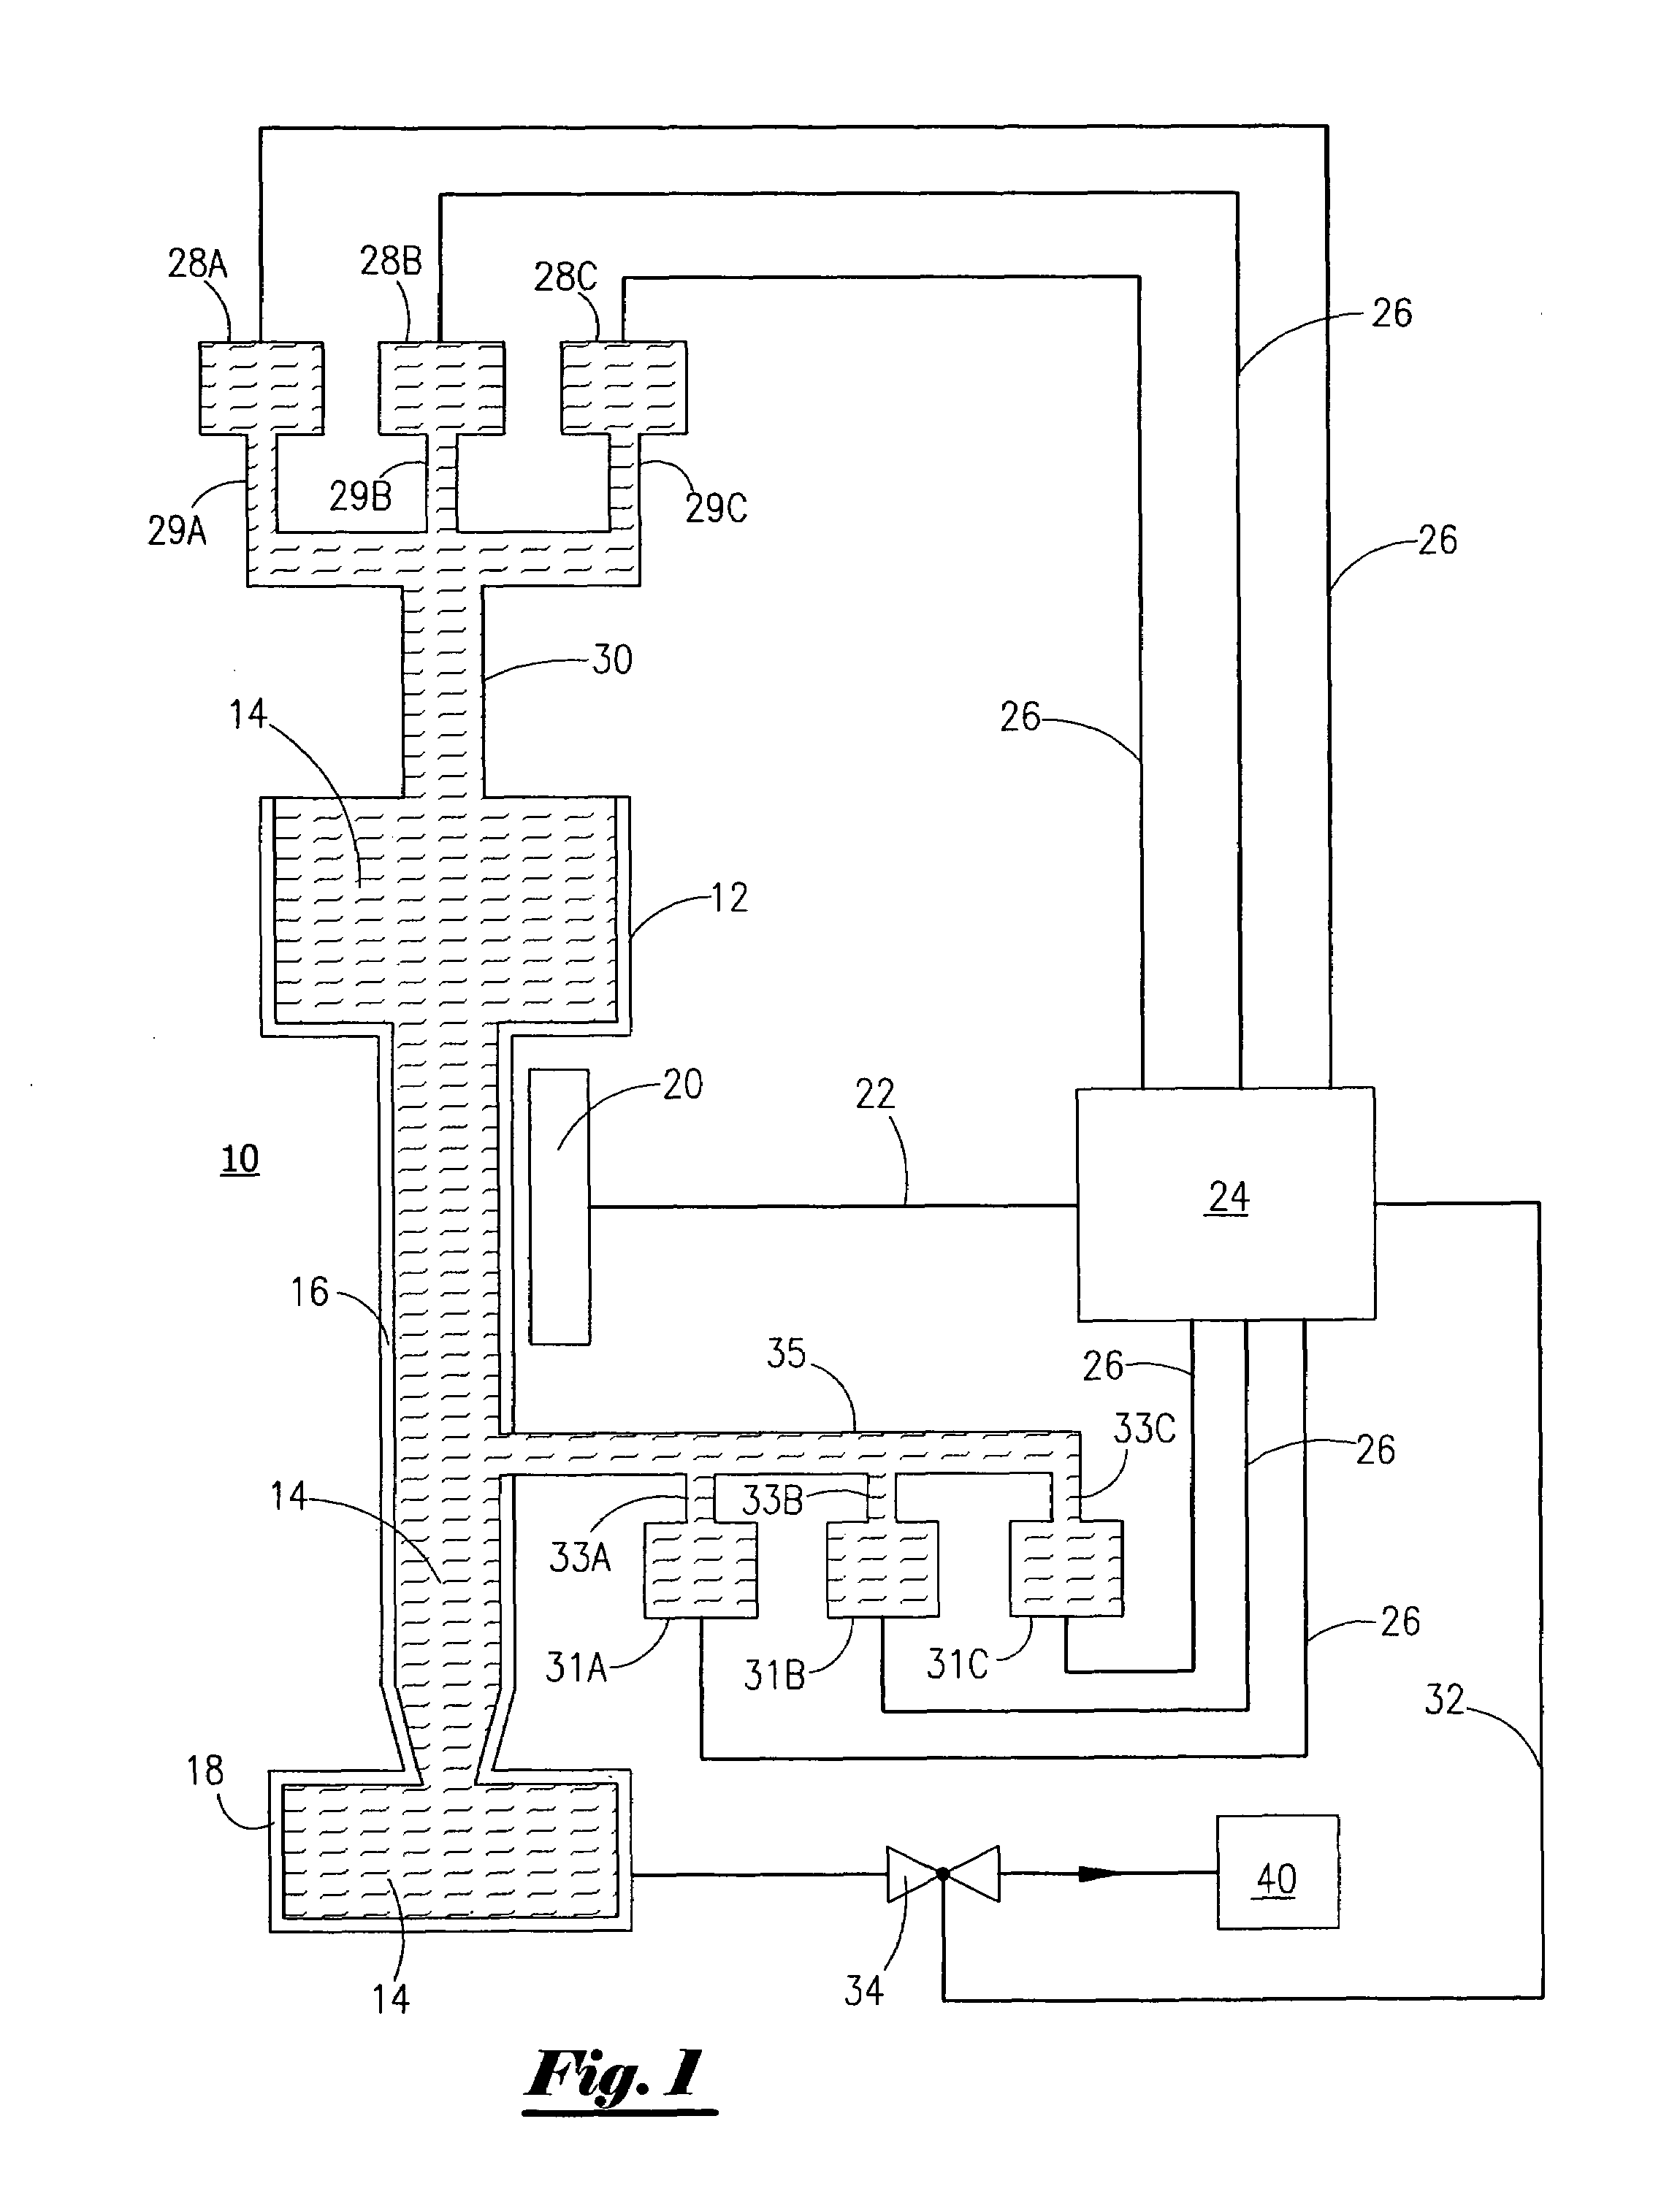 Apparatus and method for measuring particulate flow rate